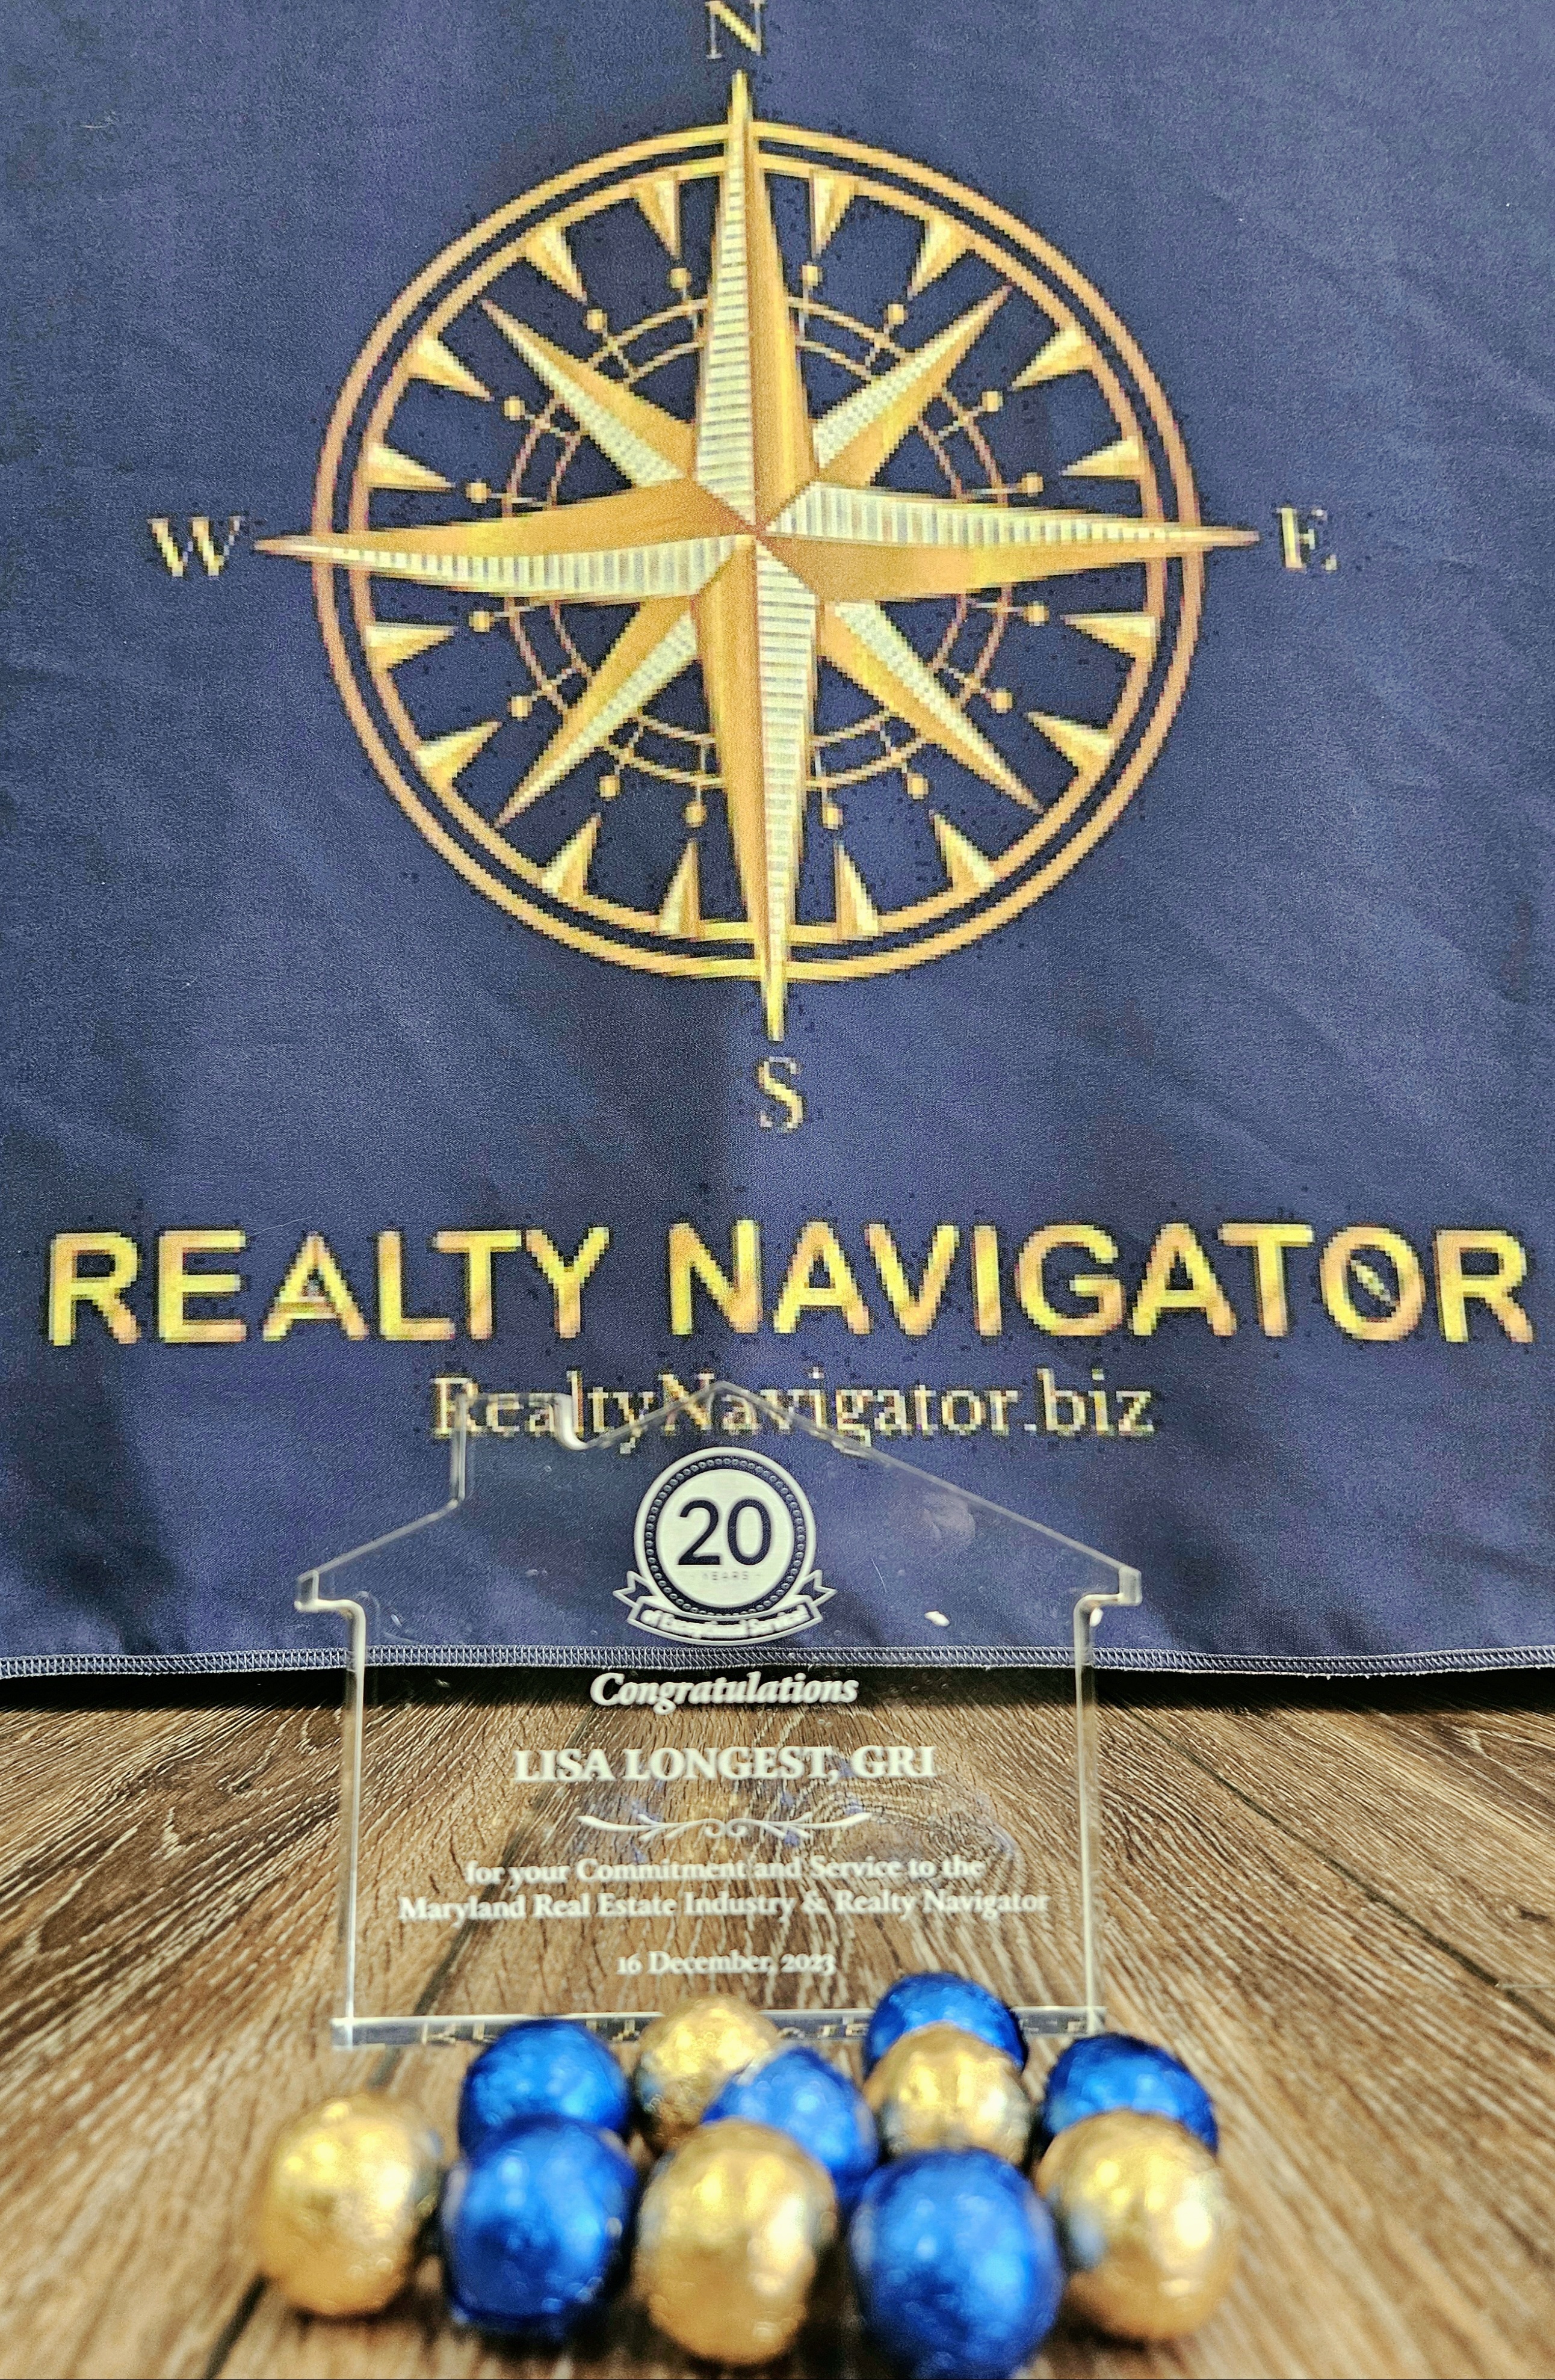 Congratulations Lisa Longest of Realty Navigator for 20 years of Excellence in Service